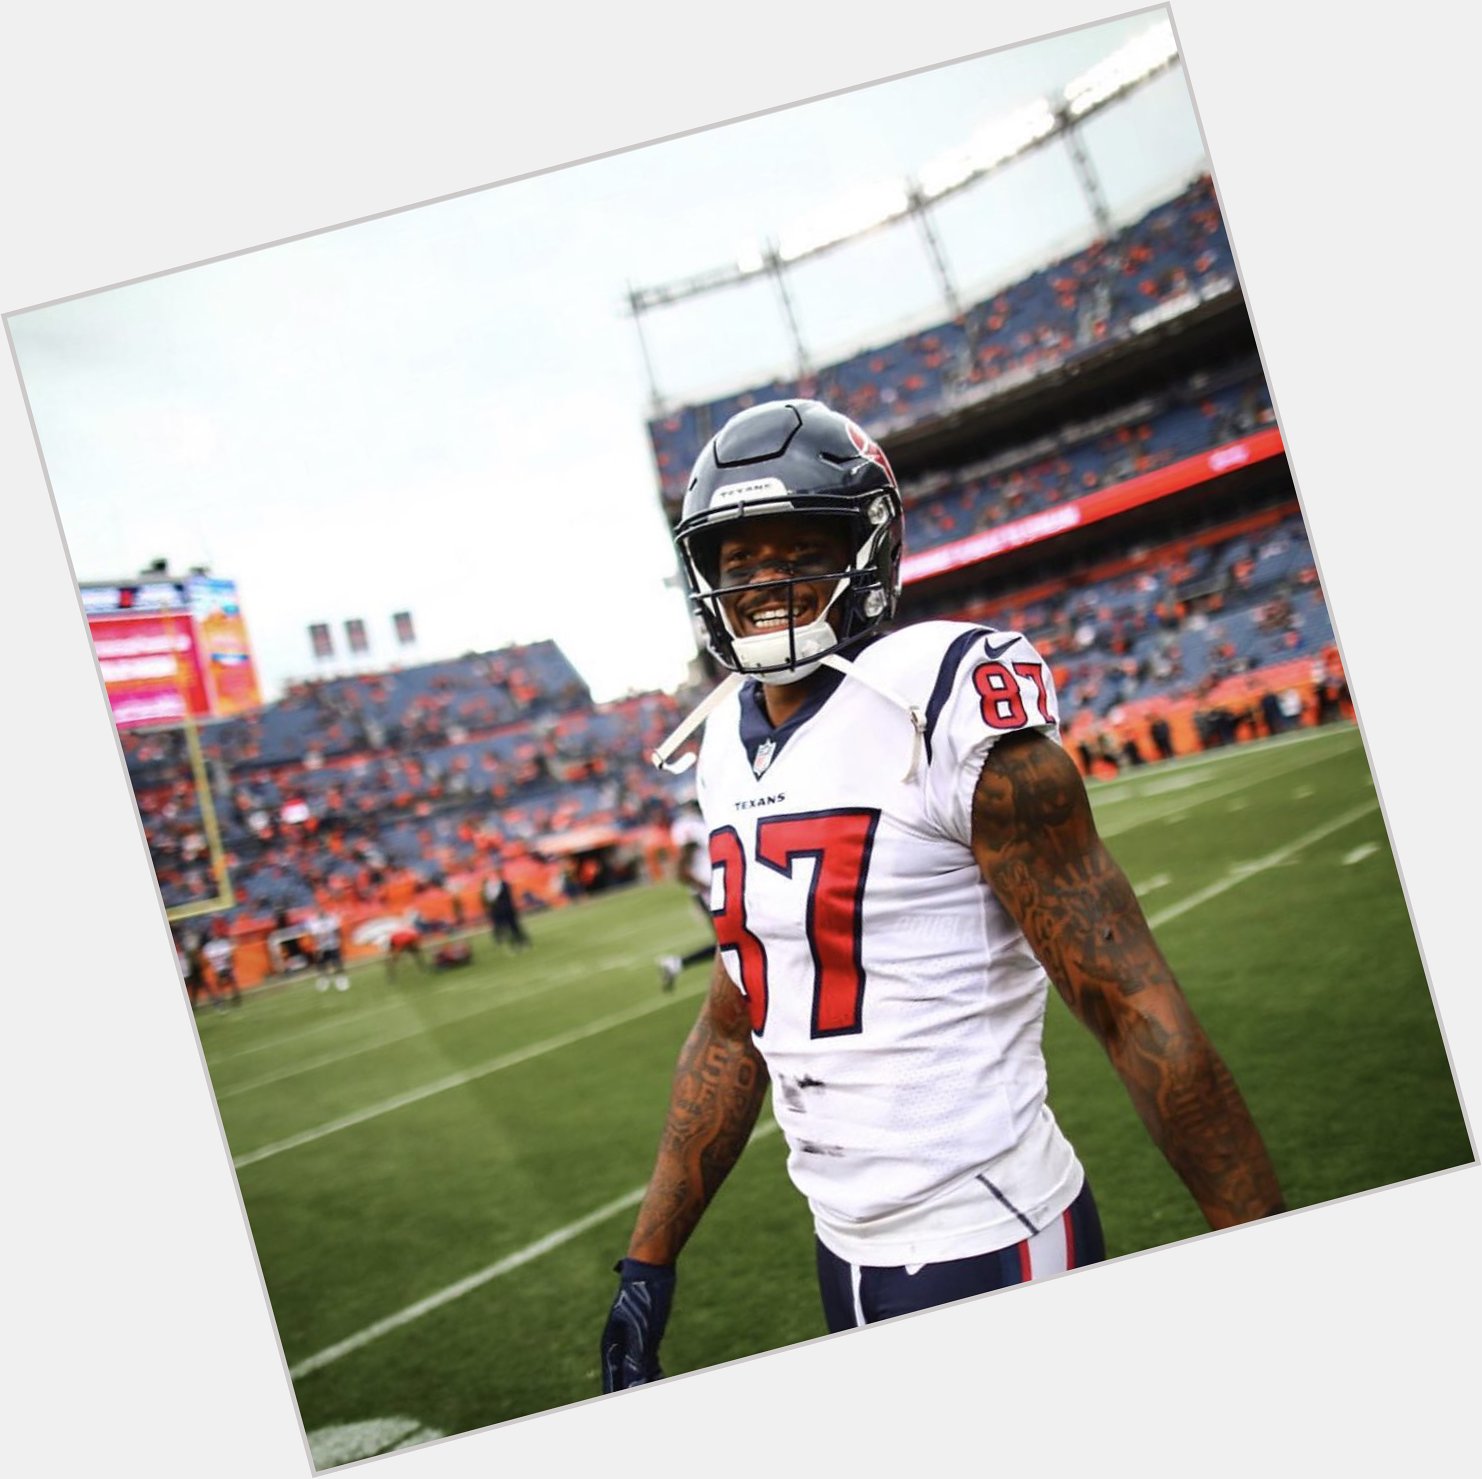 Happy 31st birthday to Demaryius Thomas, an American football wide receiver for the Houston Texans. 